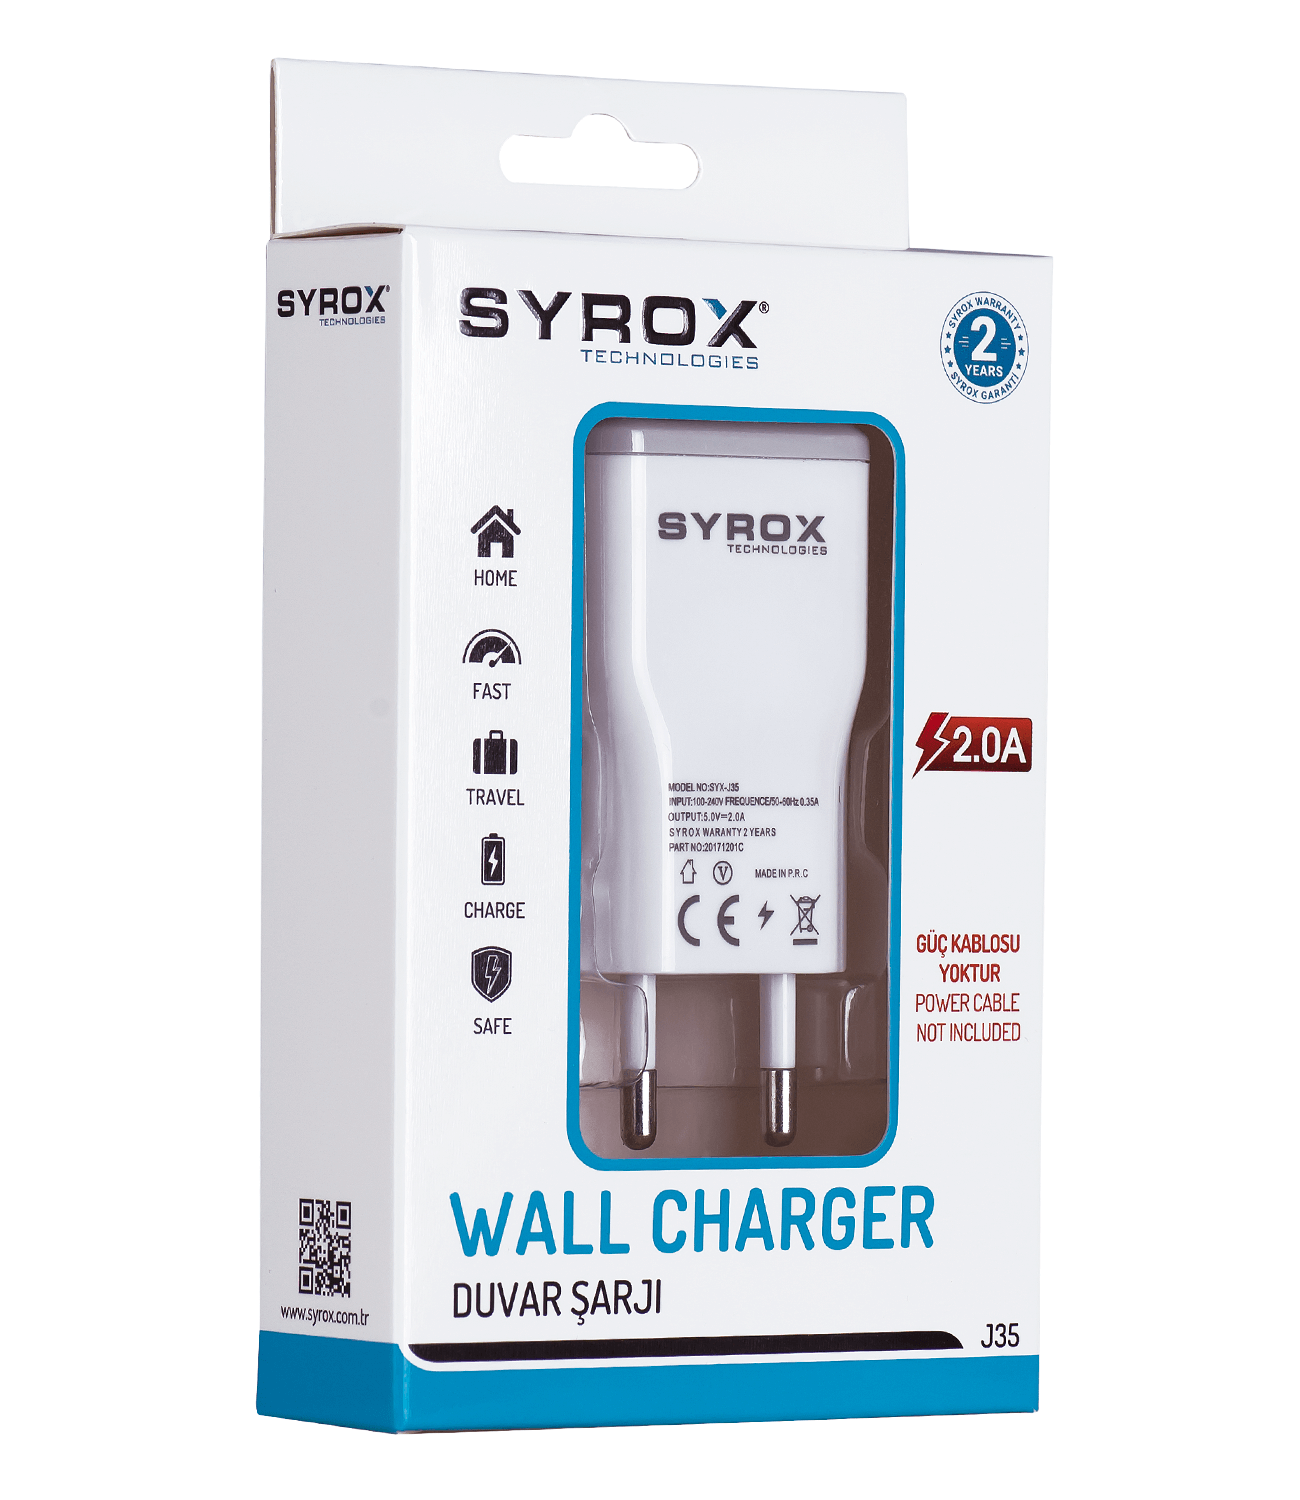 SYROX WALL CHARGER WITH USB PORT J35